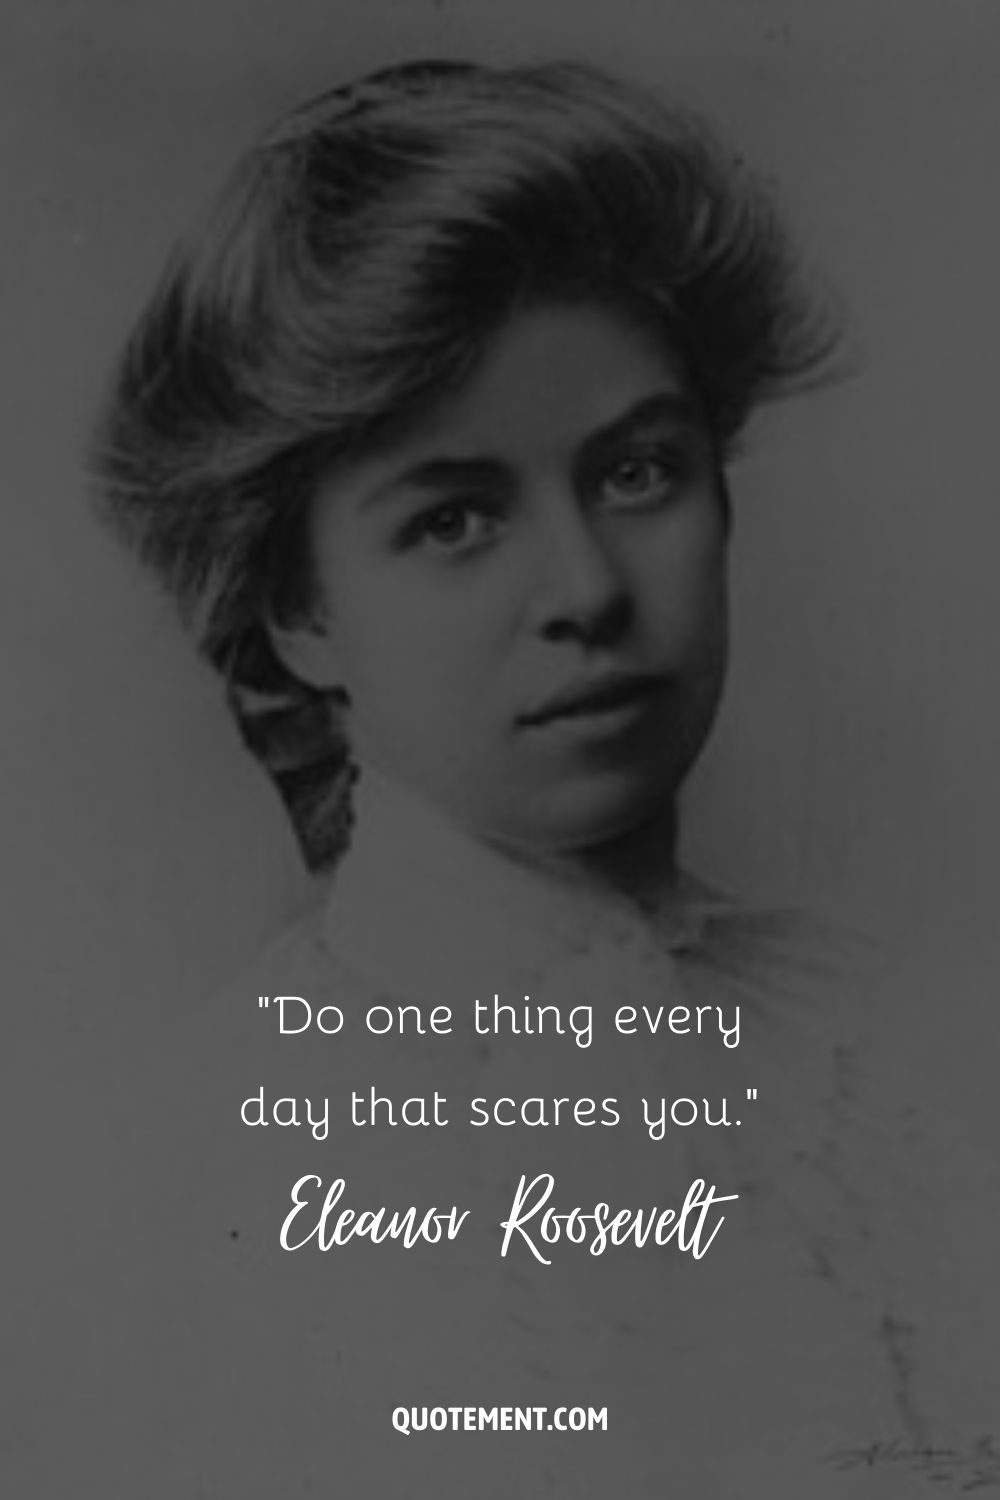 Image of a young Eleanor representing Eleanor Roosevelt famous quote.
